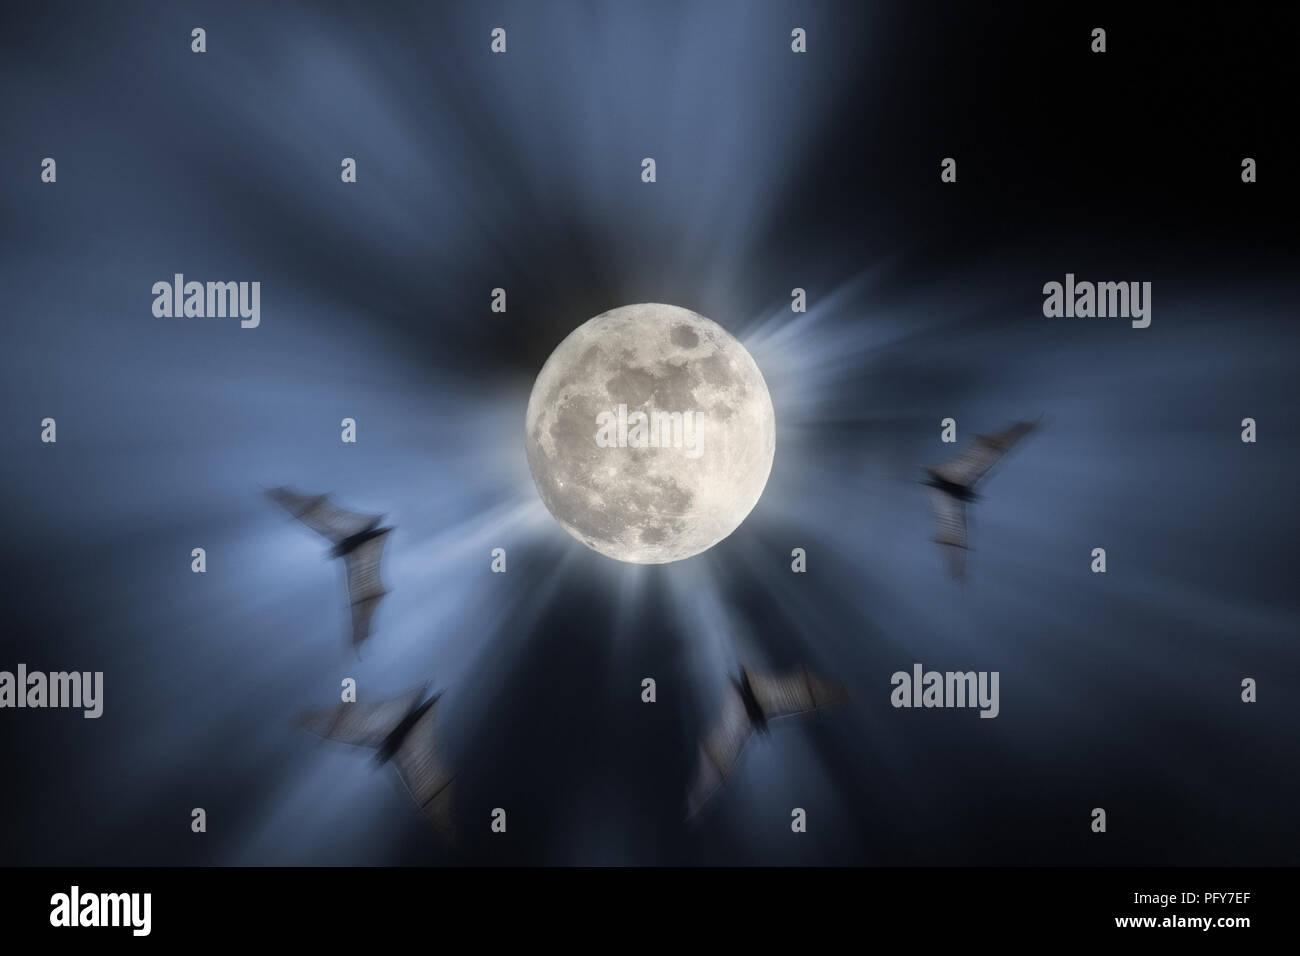 Photo composition with full moon at night, bats in flight and light beams (added some digital noise) Stock Photo